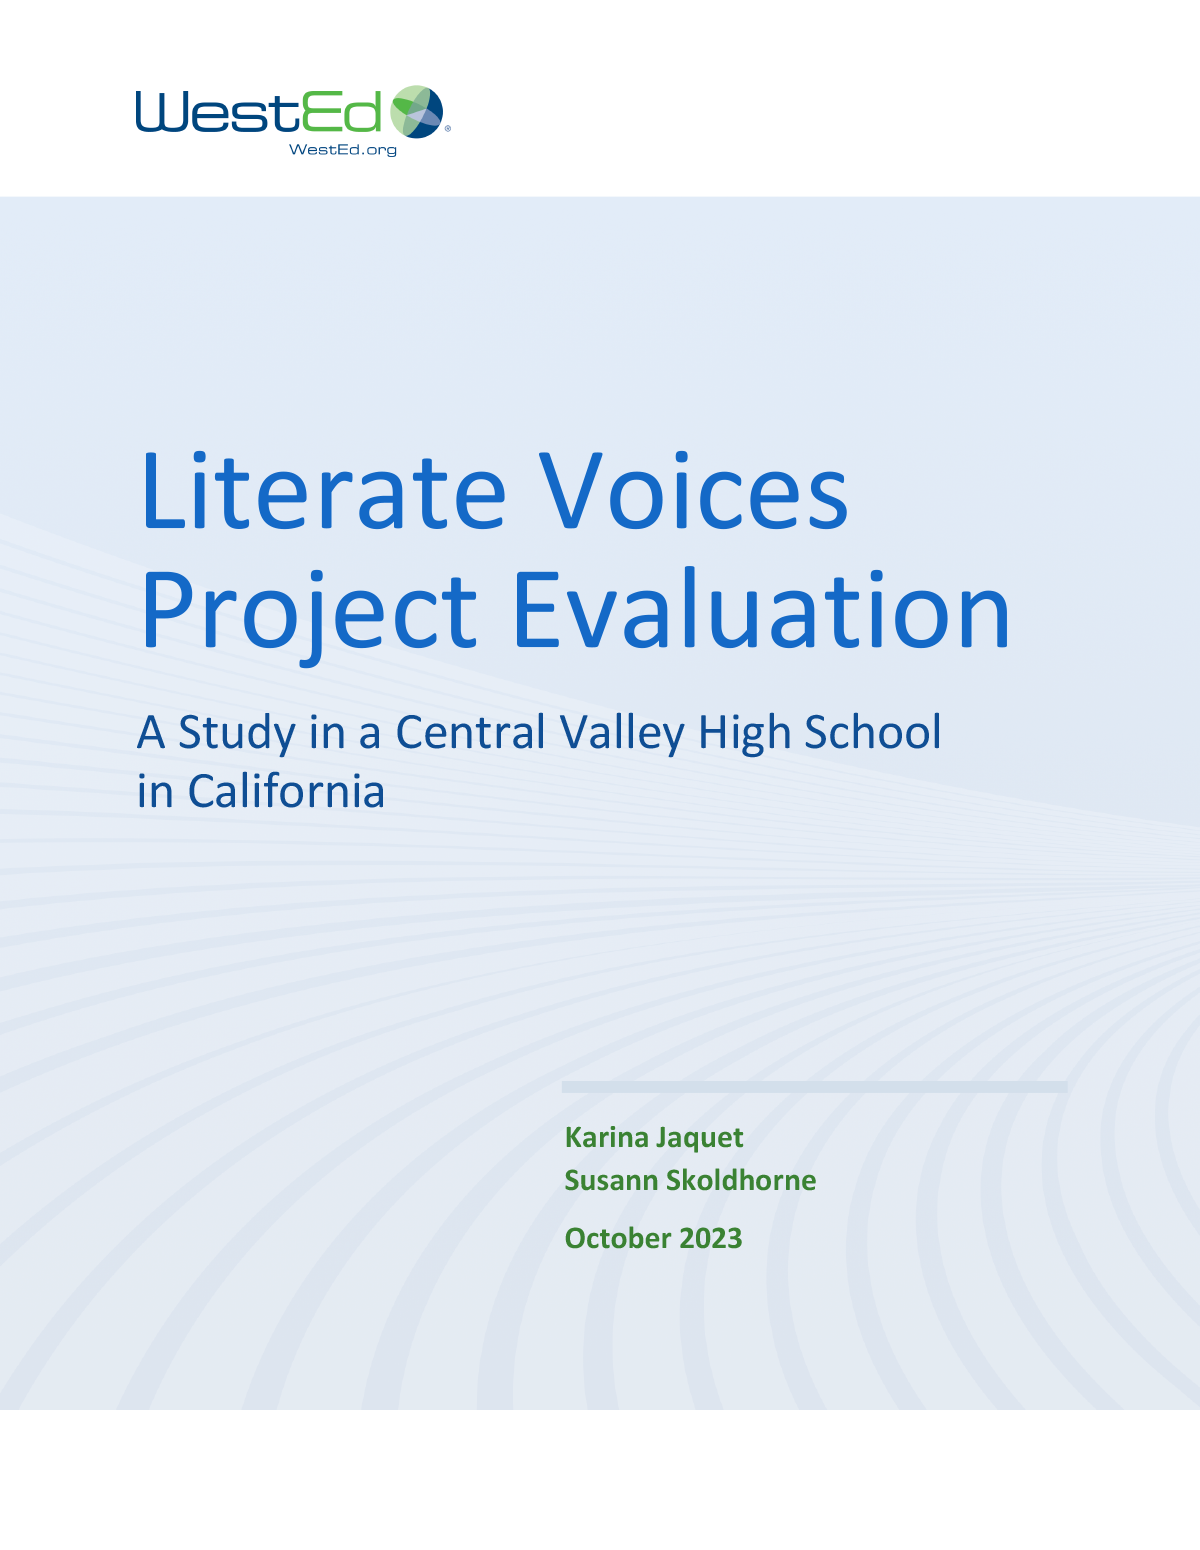 Literate Voices Project Evaluation: A Study in a Central Valley High School in California